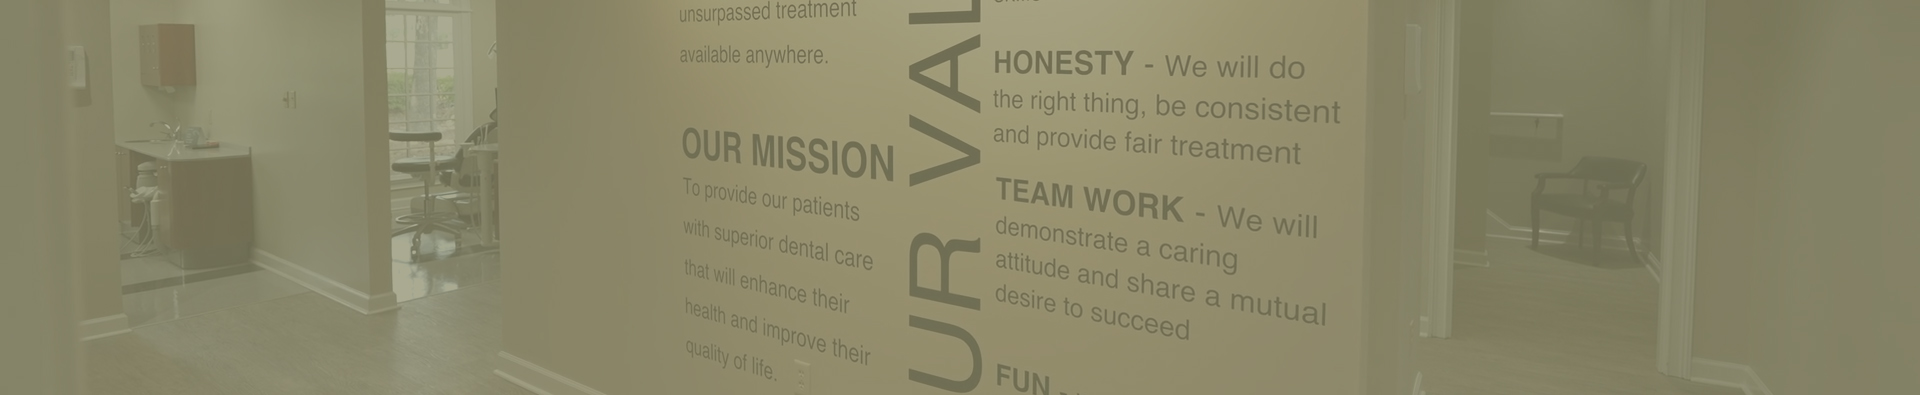 North Valdosta Dental Care Our Values Wall